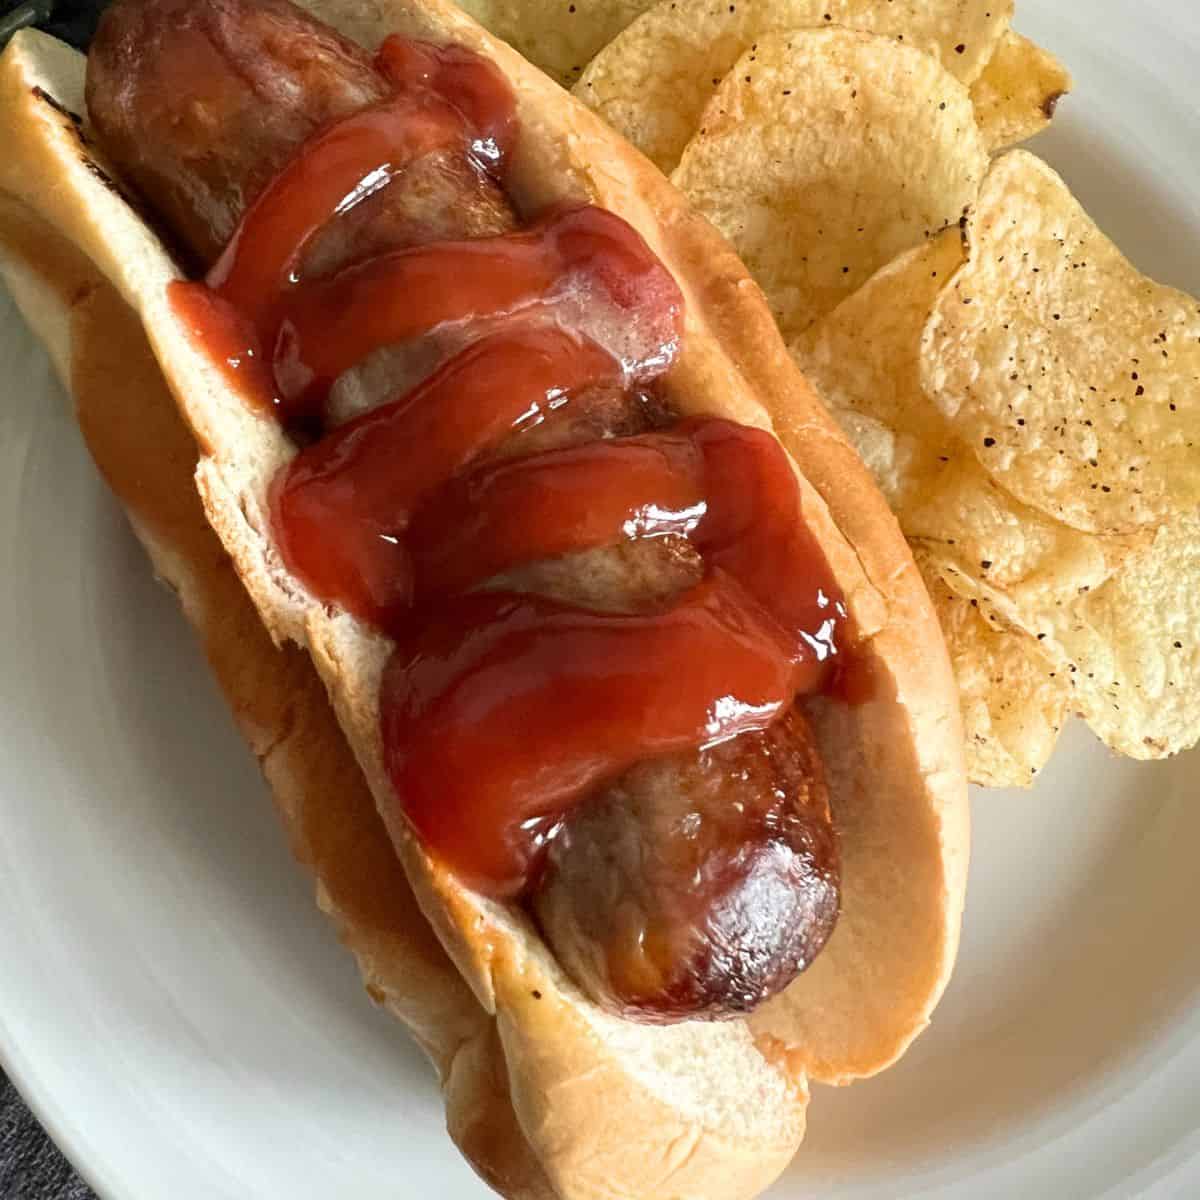 Cooked air fryer brat in a bun topped with ketchup. 